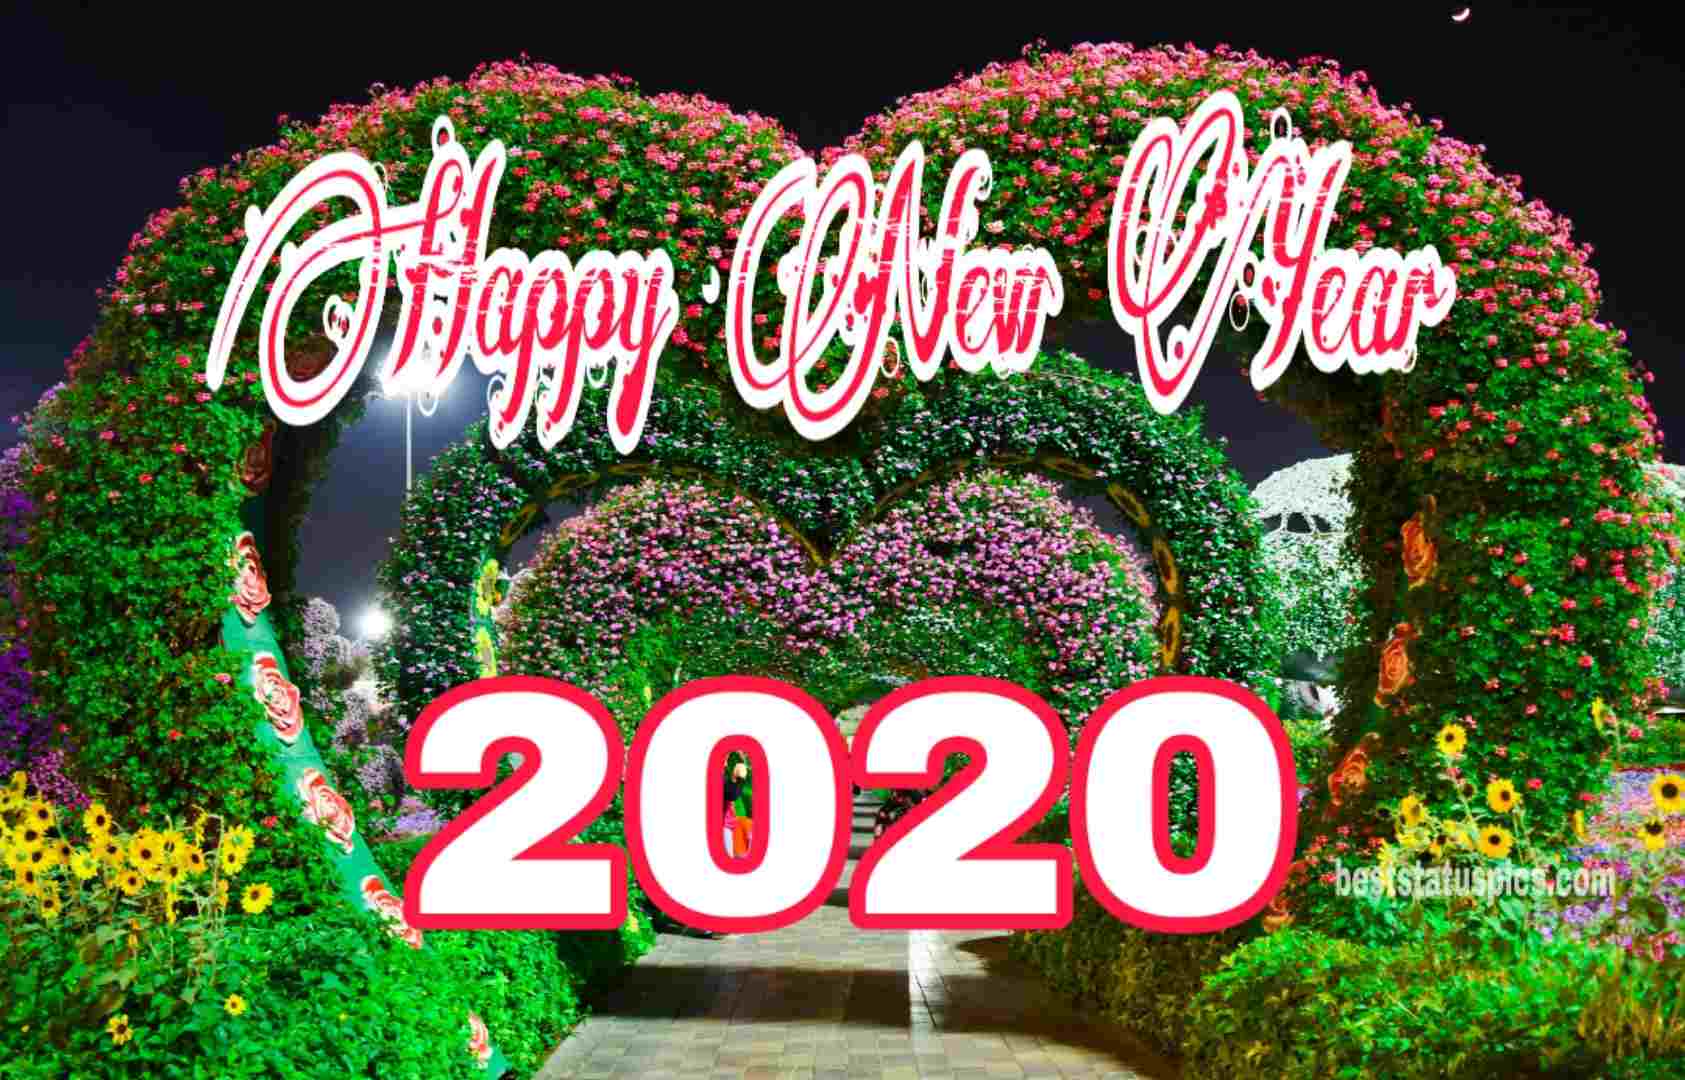 Happy New Year 2020 With Flowers - HD Wallpaper 